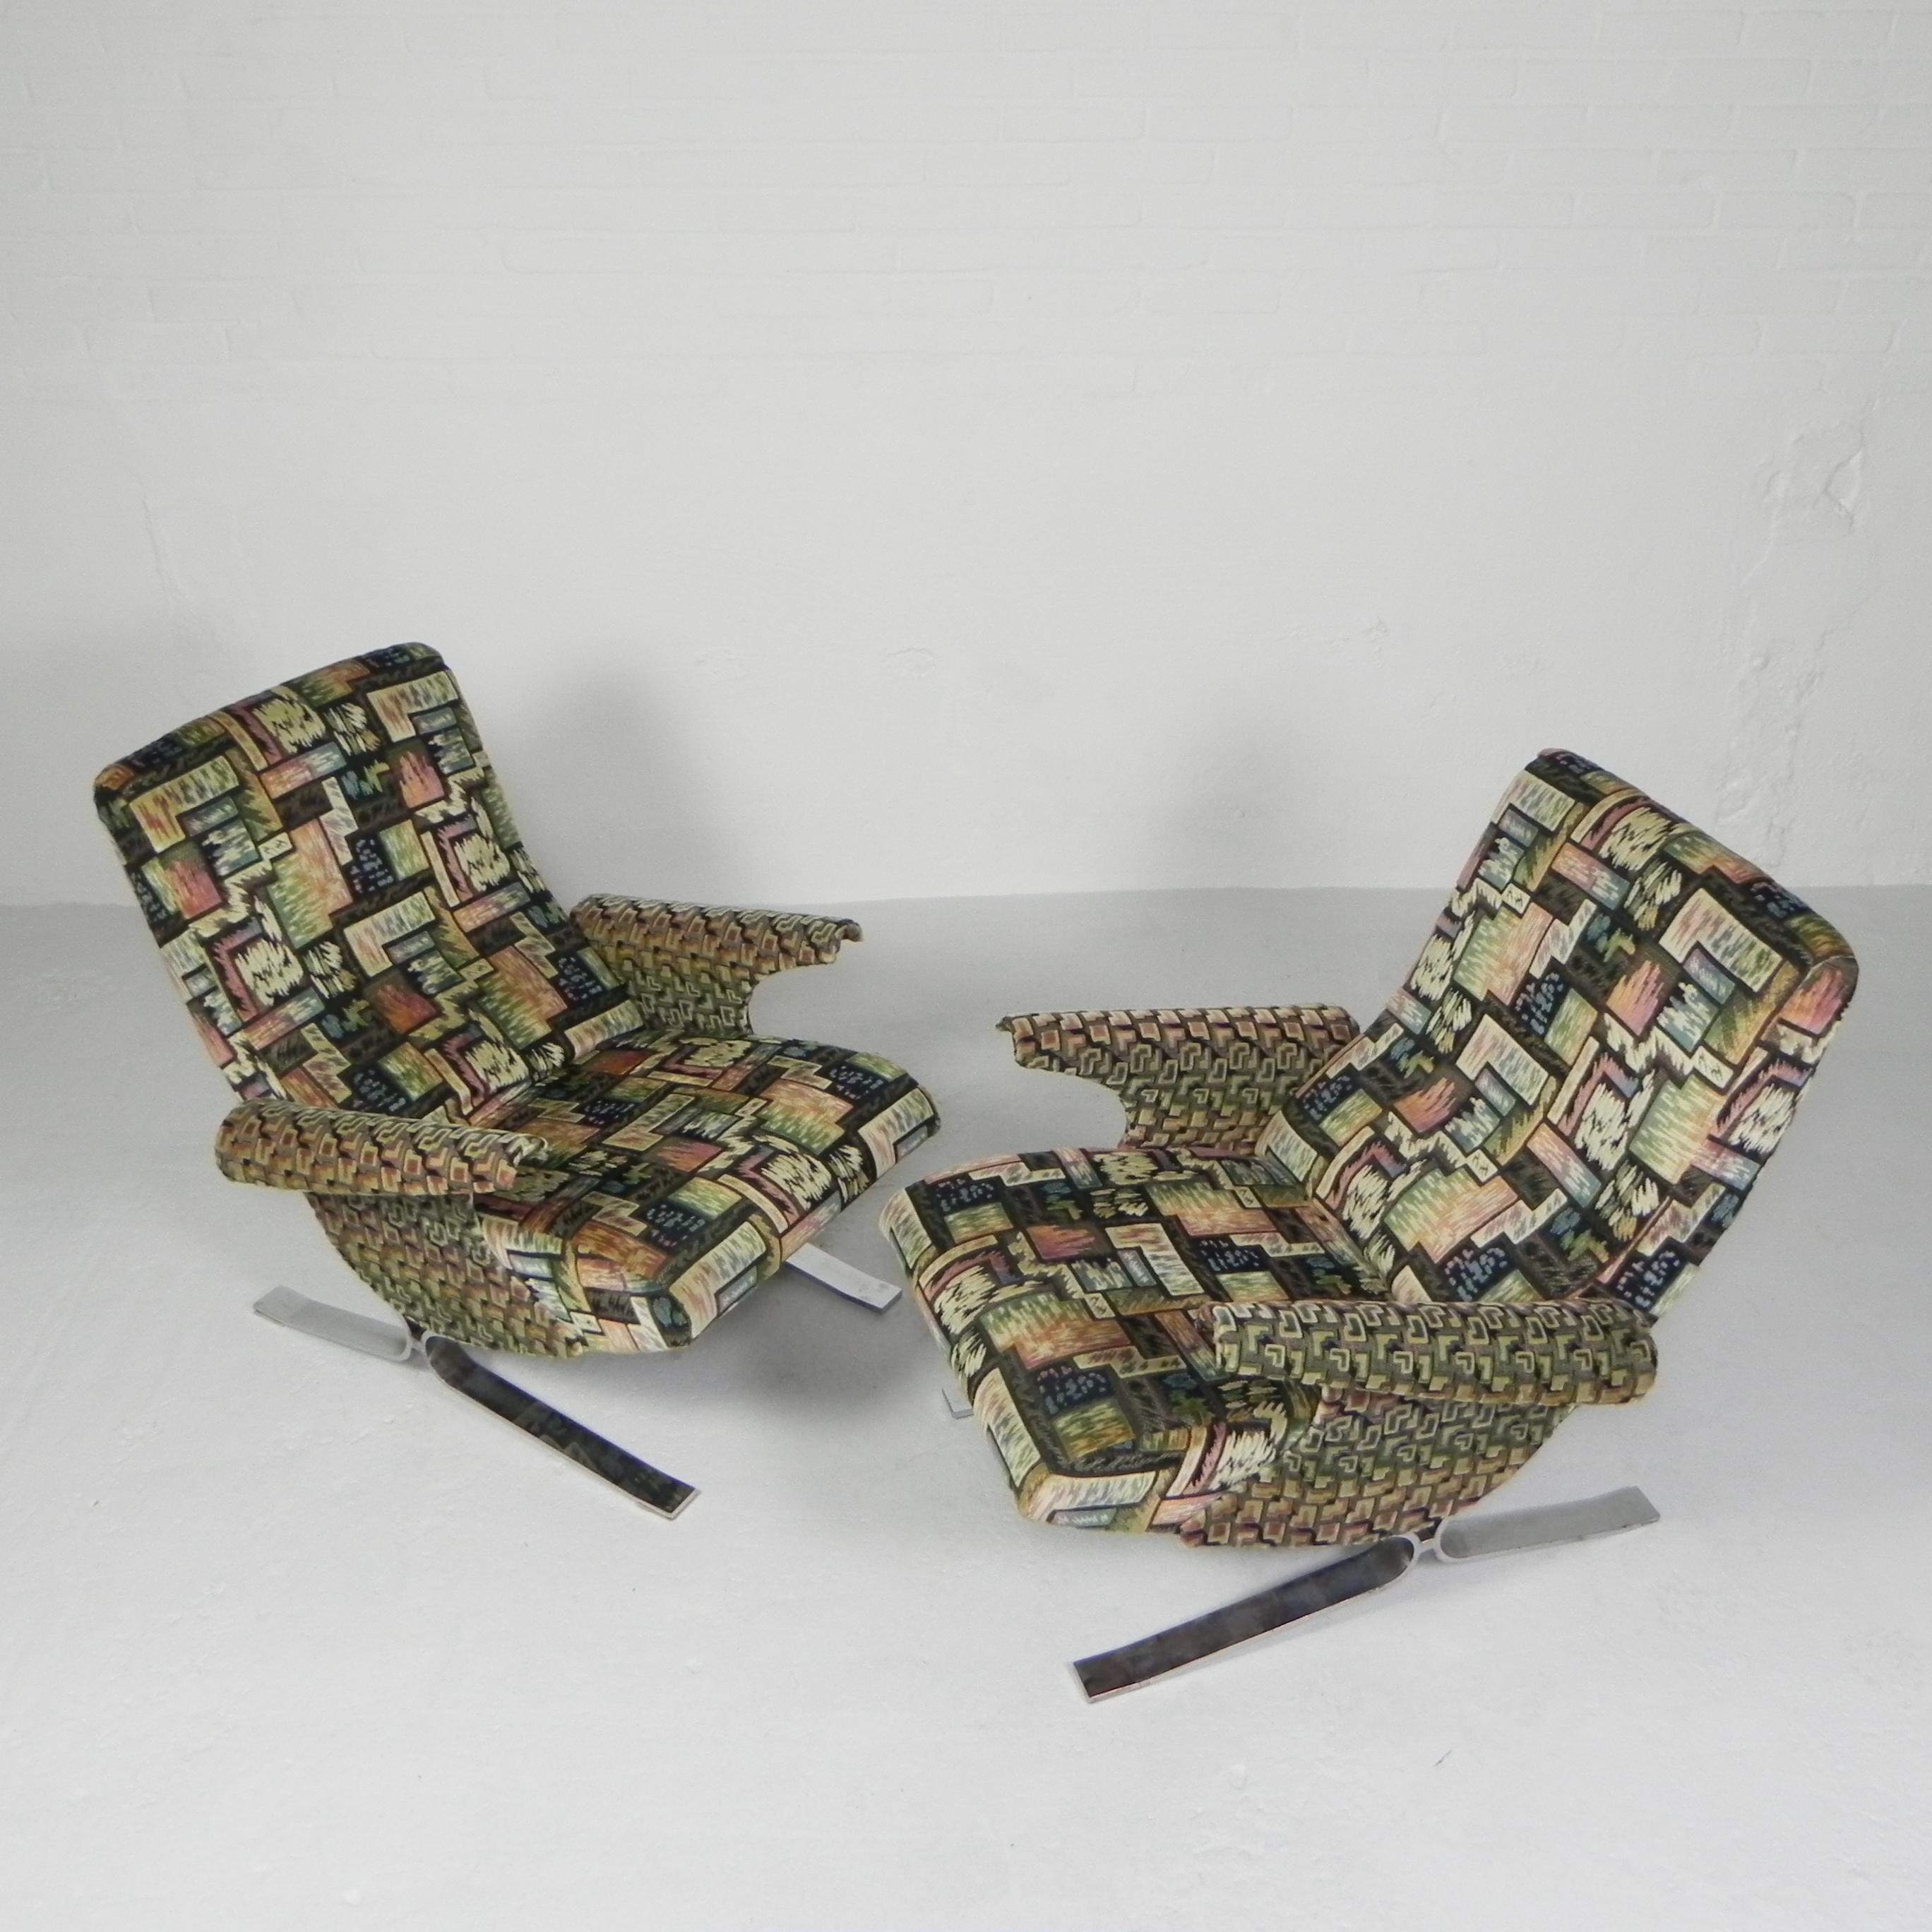 These chairs were specially upholstered in the 1960s
for a French TV broadcast. They fit heavenly!
Will you soon feel like Depardieu or Deneuve?

Height: 81 cm.
Width: 72 cm.
Depth: 90 cm.
Seat height: 40 cm.
The chairs were produced by Maurice